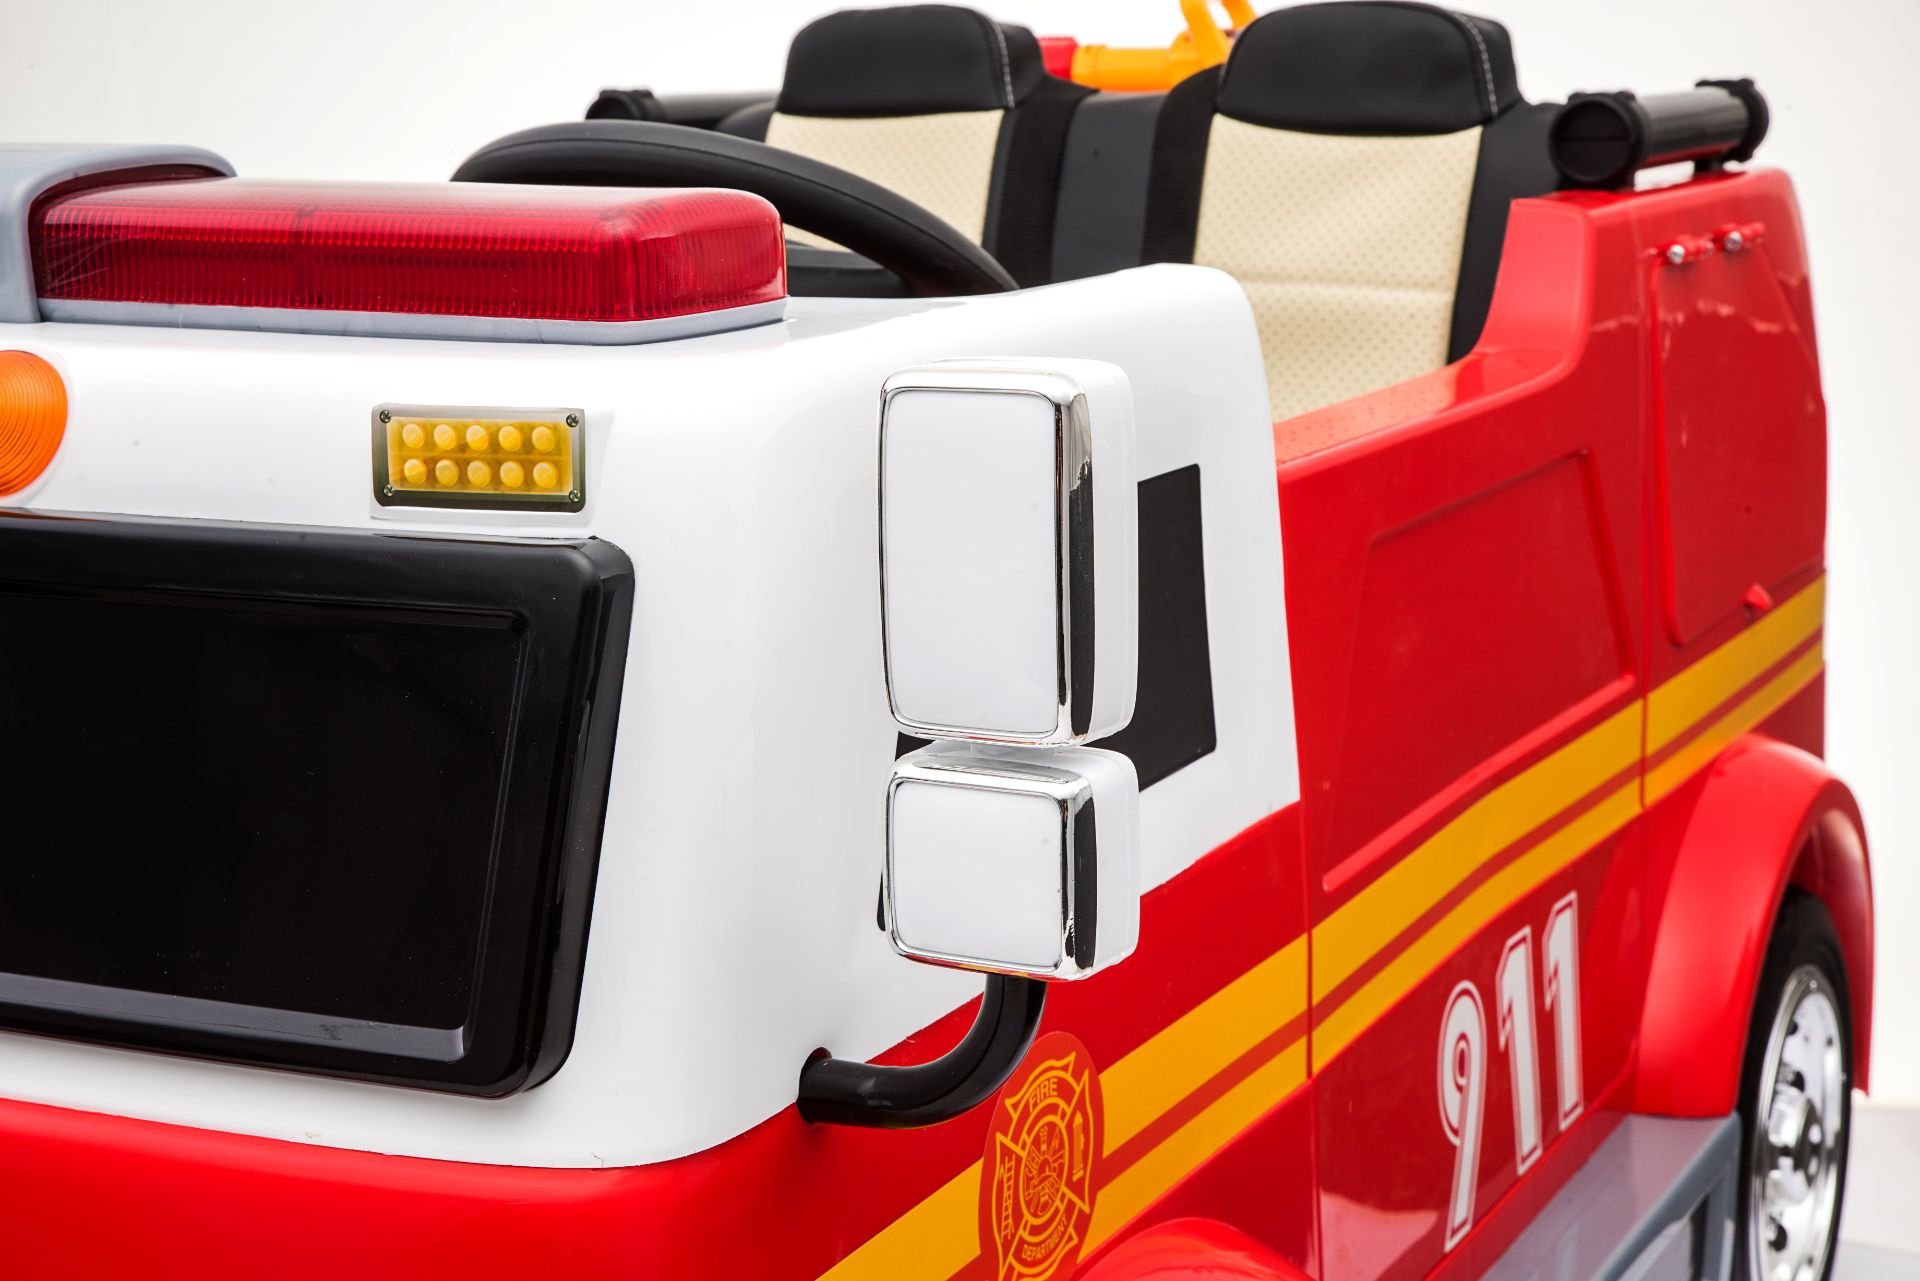 Ride On Fire Truck 911 12v EVA Wheels Twin Leather Seats and Parental Remote Control - Image 5 of 21